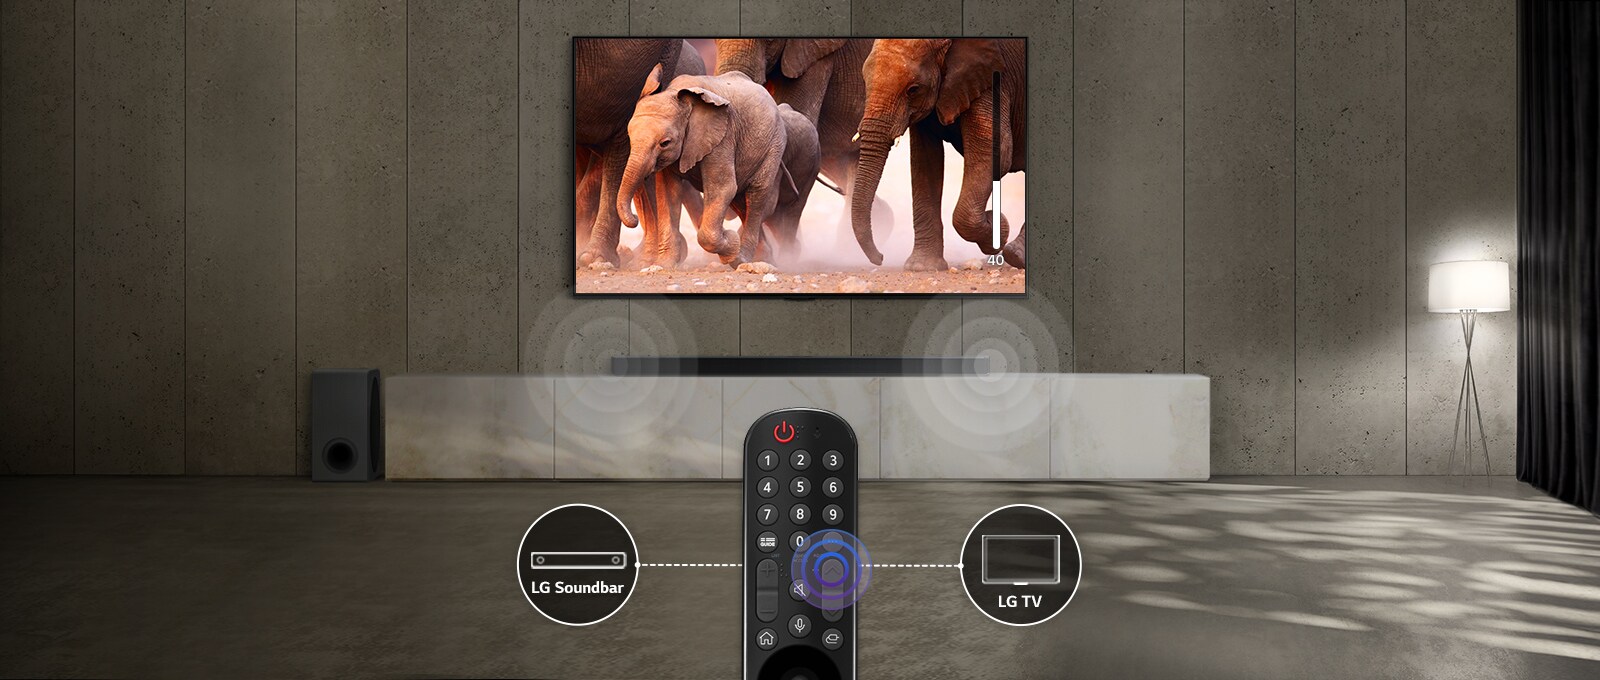 TV in a room with subtle lights shows images of elephants passing by. And there is a sound effect on the sound bar under the TV. At the bottom of the image, there is a TV remote control, and the sound bar and the icon of the TV are connected to the left and right of the remote control.